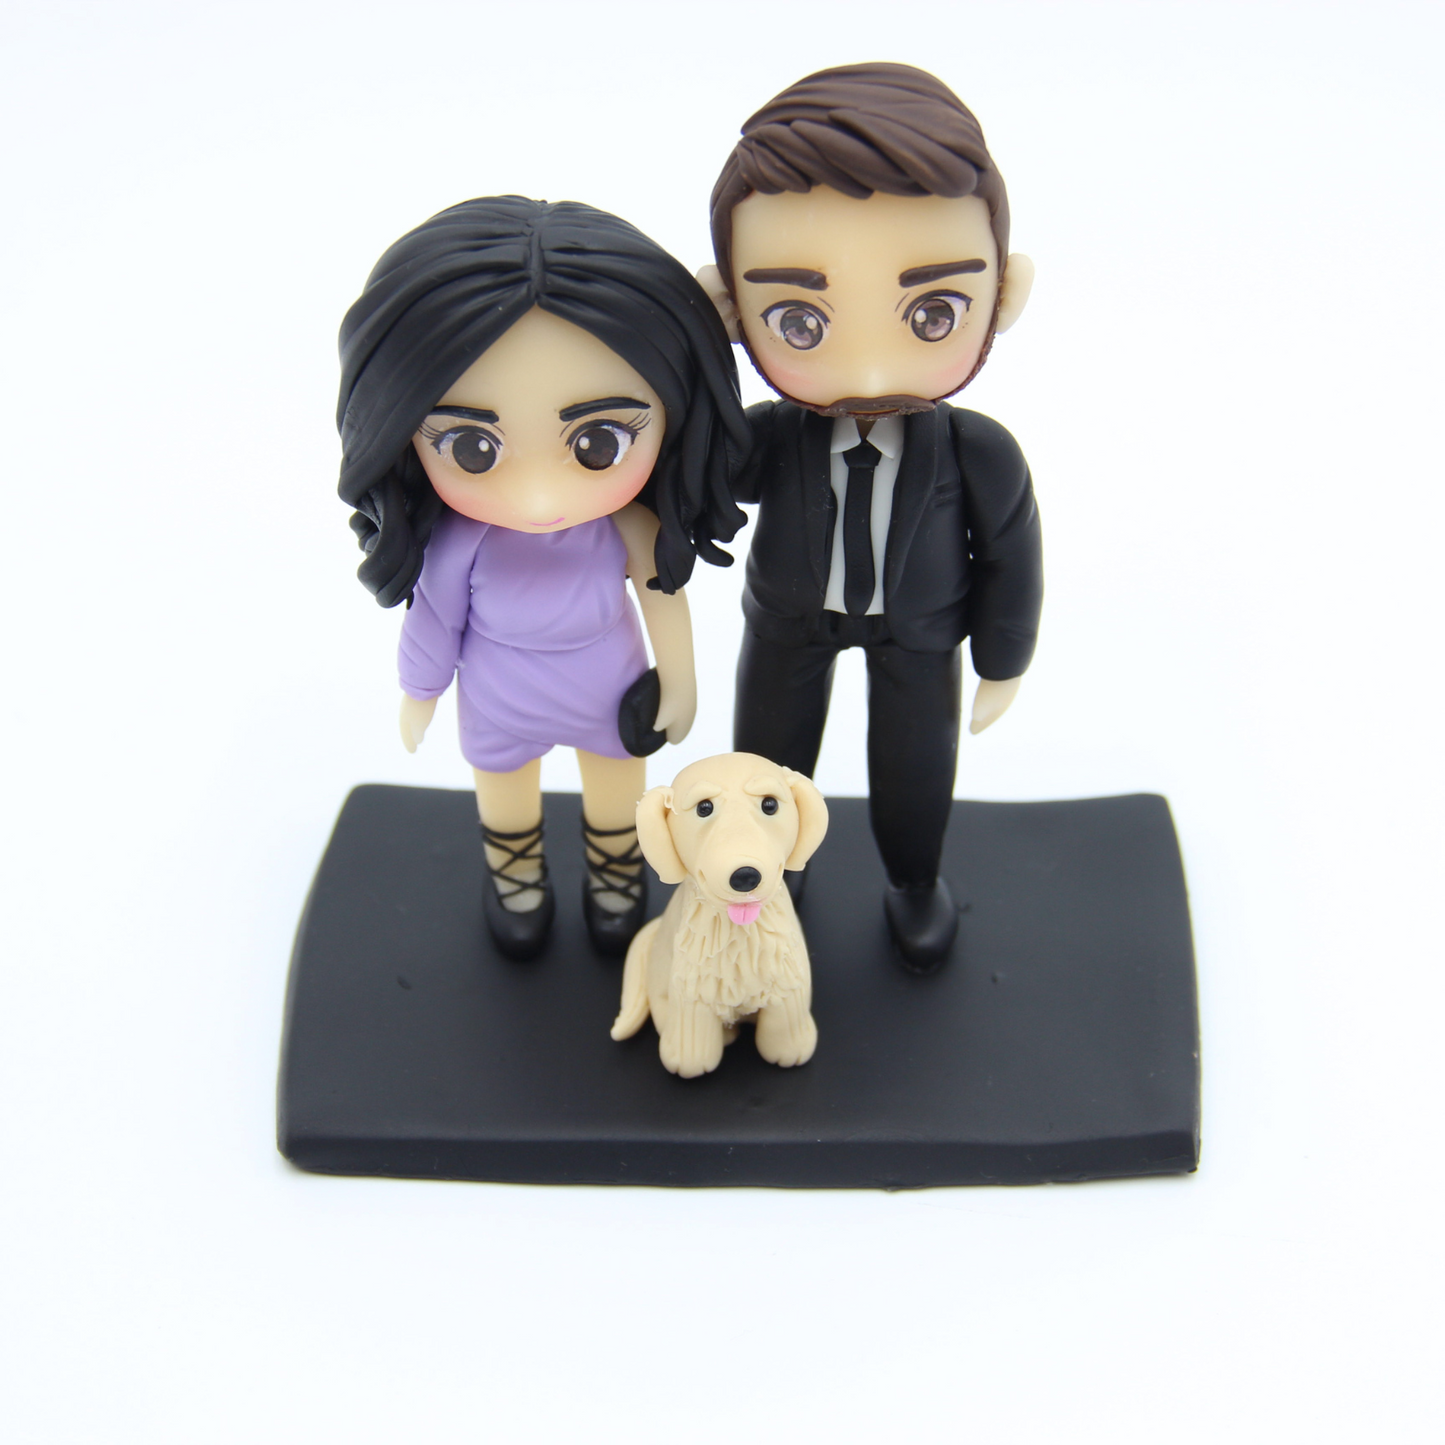 Custom made cake toppers with pet, personalized clay figurines for pet lovers, 6cm clay miniature